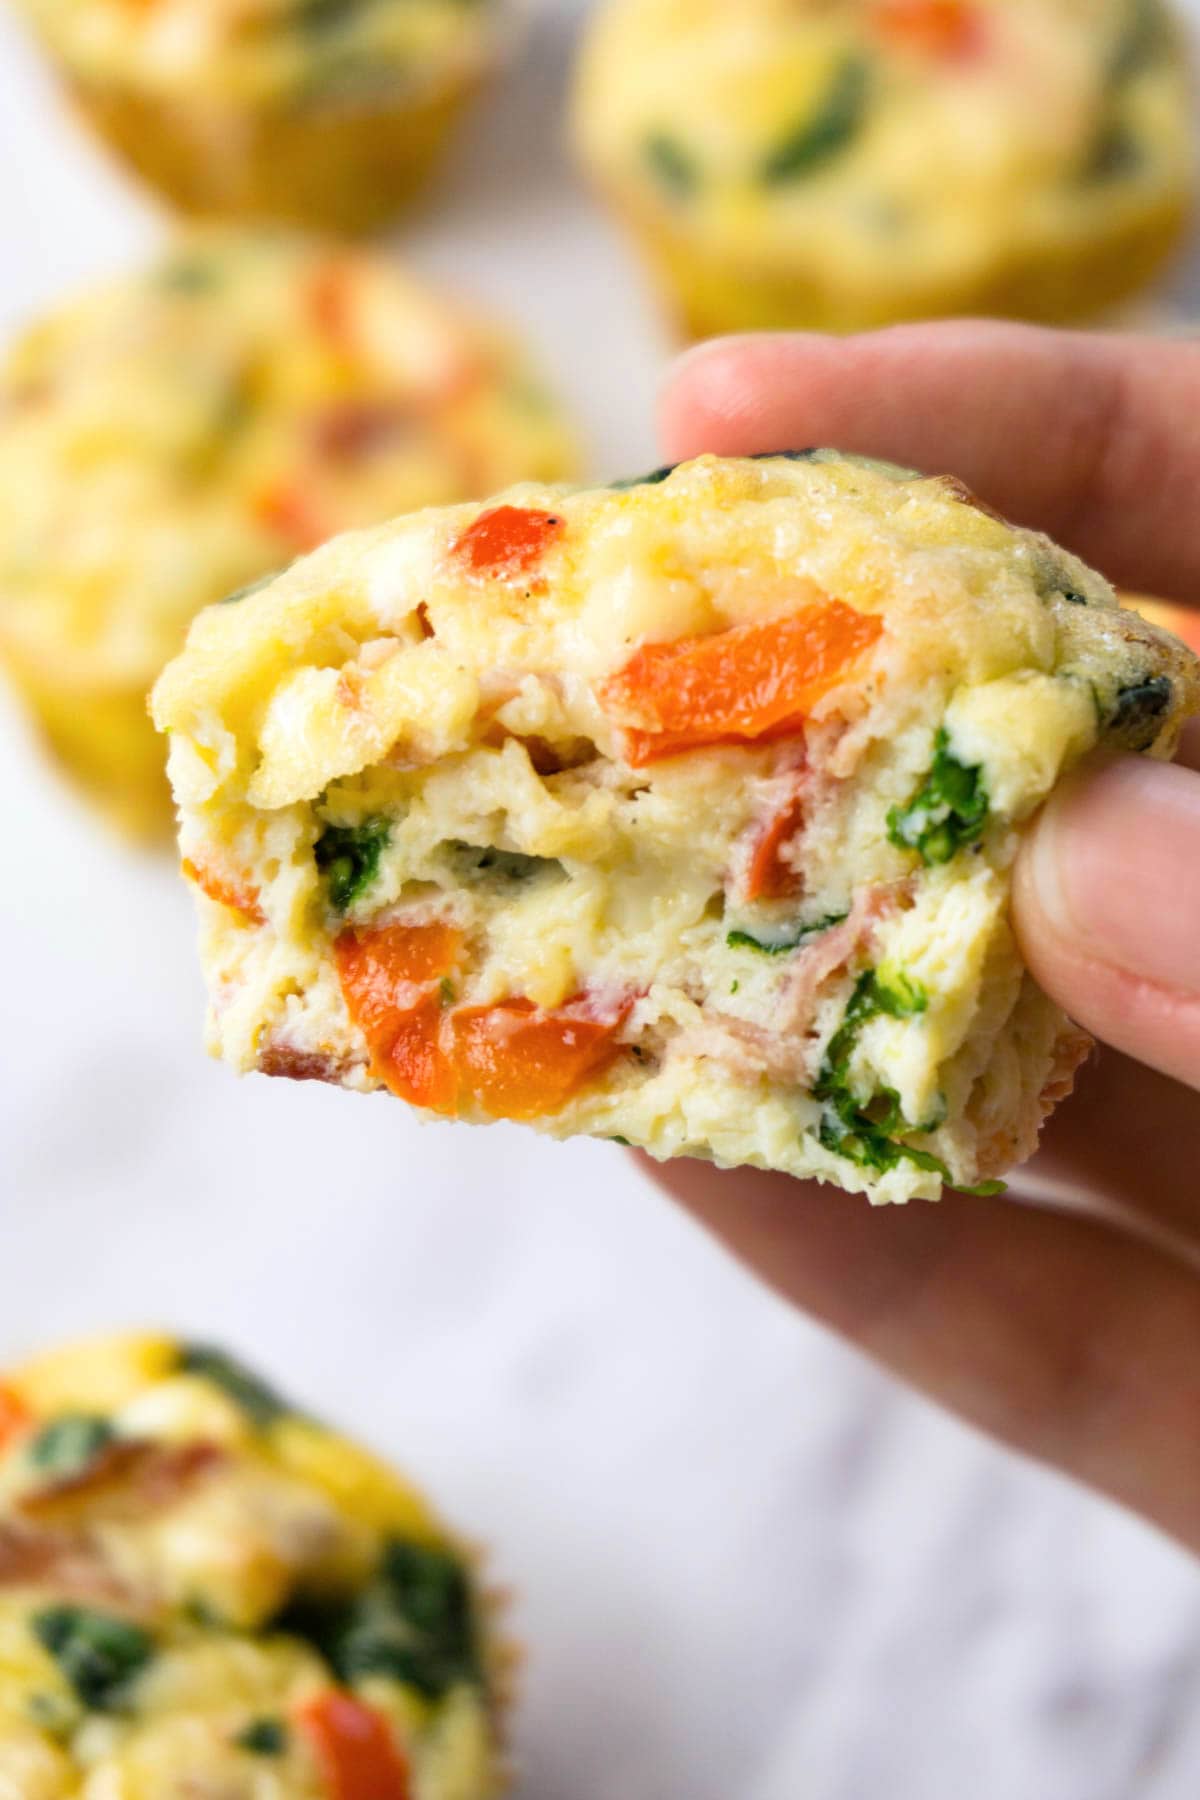 A had holding an egg muffin with spinach, red bell pepper and bacon bits, one bite taken.